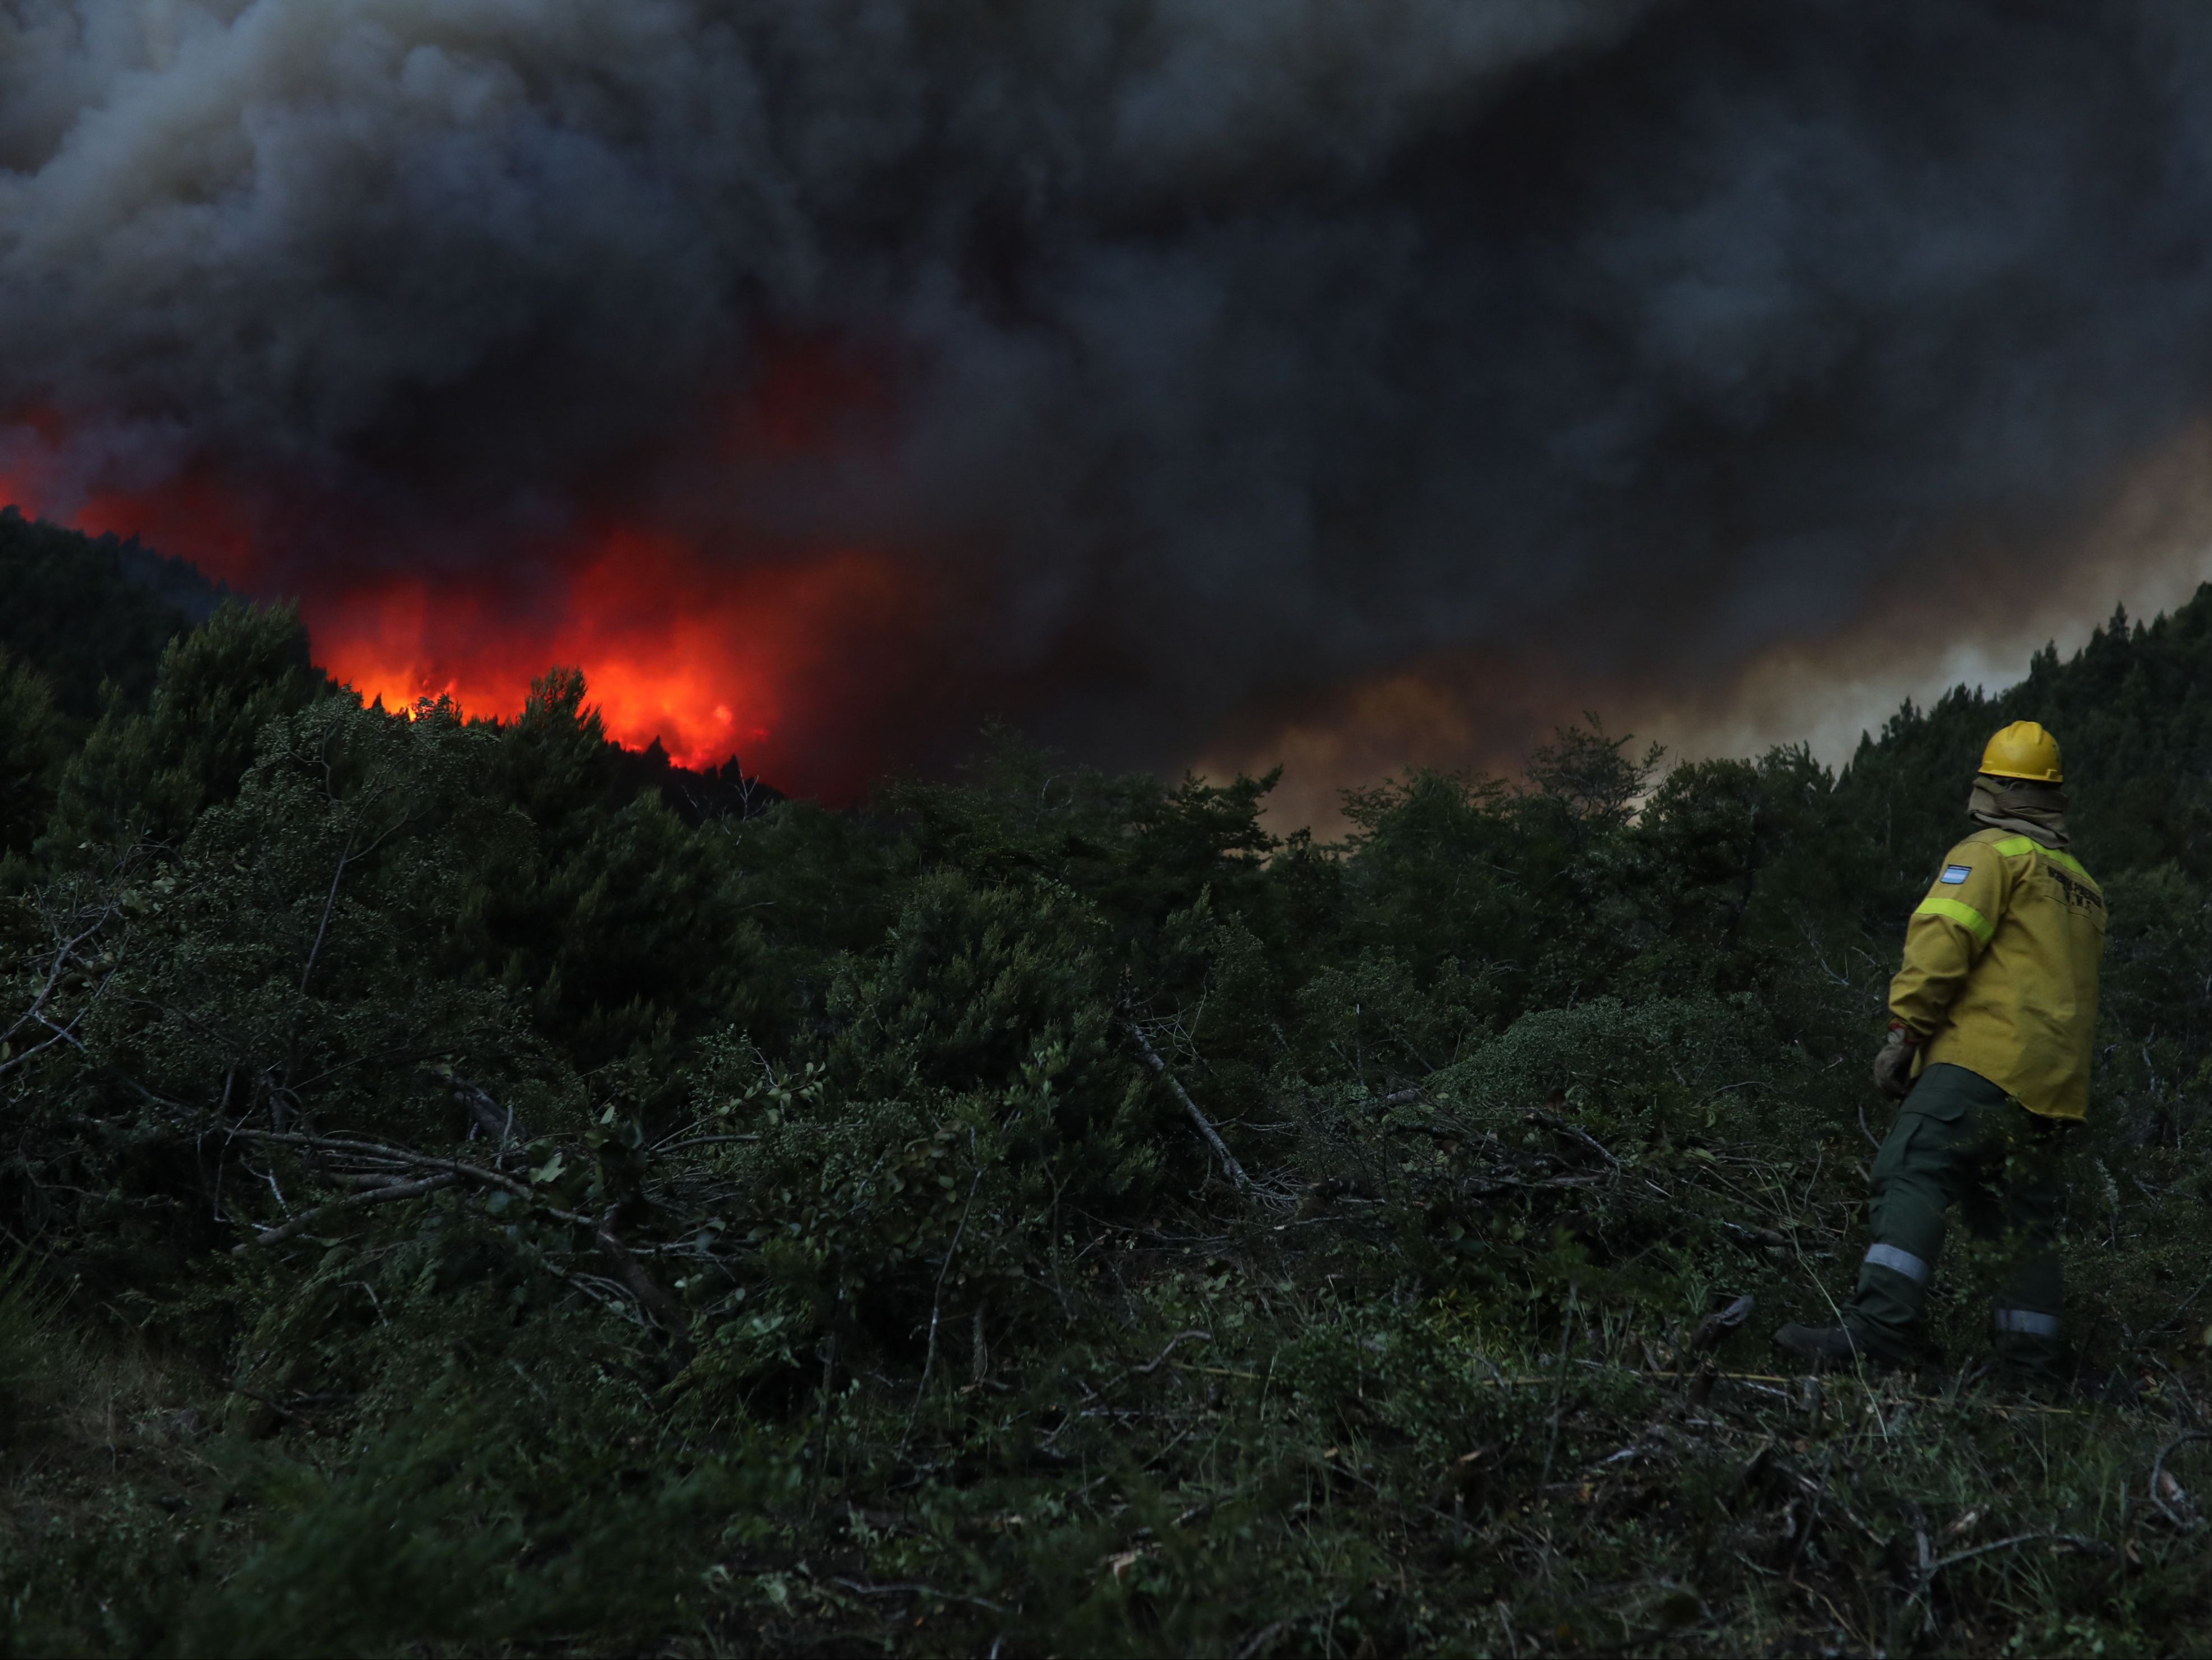 A fireman works to extinguish a fire that broke out in Paraje Villegas, Rio Negro province, 70 km south of Bariloche, Argentina